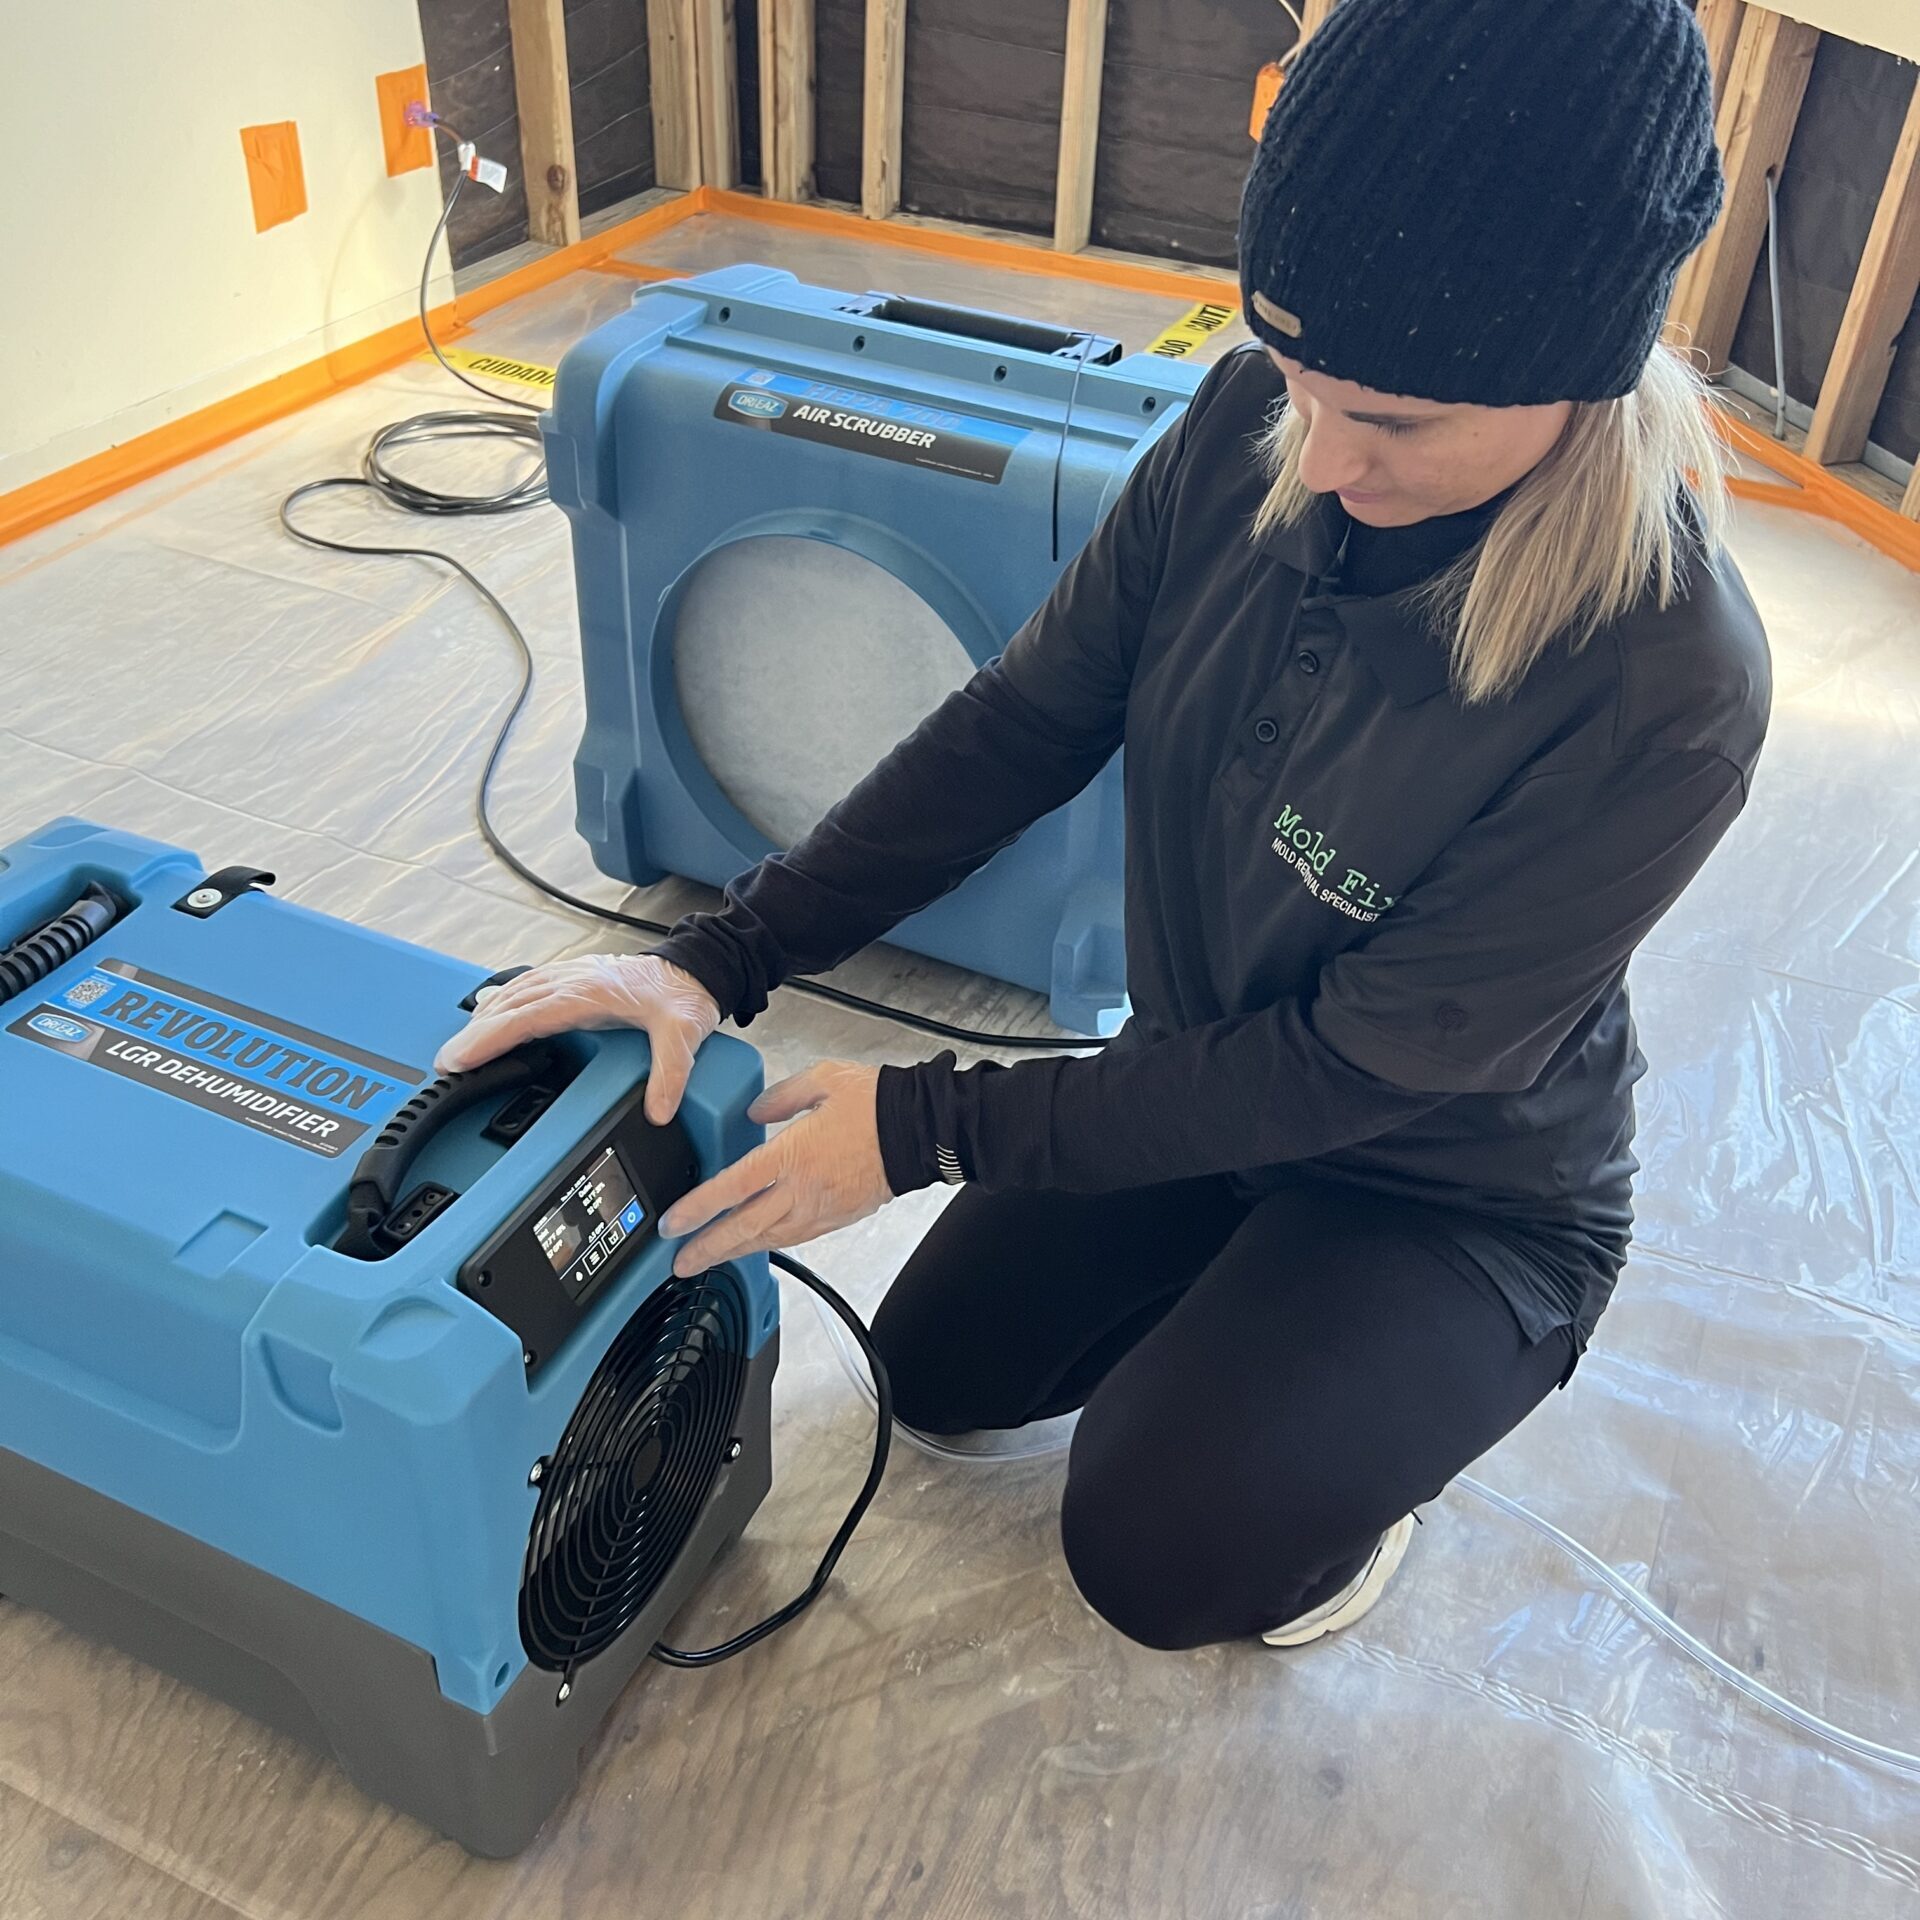 Technician adjusting industrial dehumidifier during water damage services in Orange County